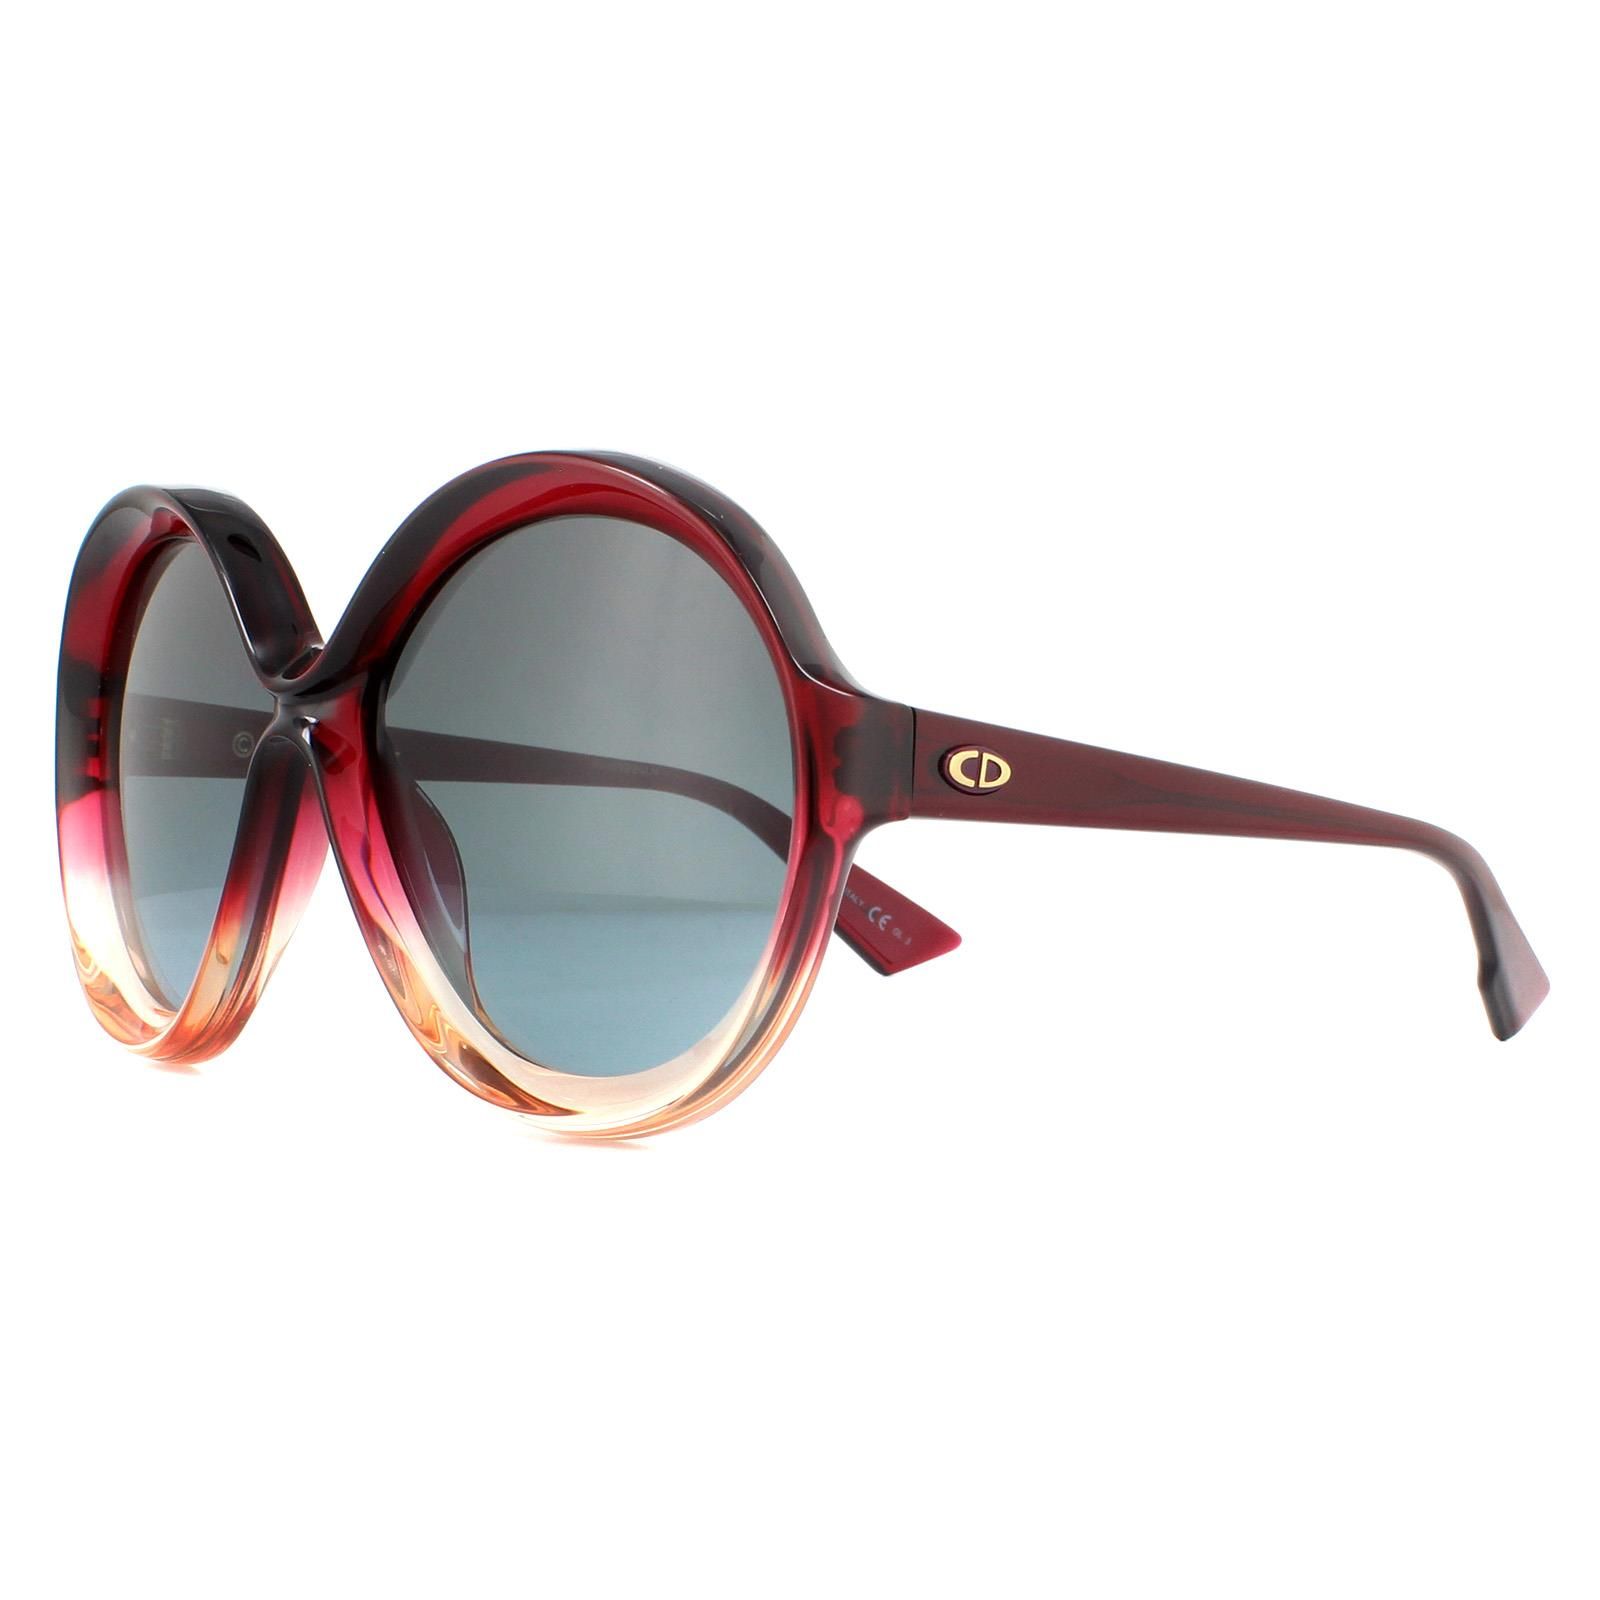 Dior Sunglasses Bianca 0T5 I7 Burgandy-Pink Grey Petrol Gradient are a modern round style, crafted from lightweight acetate.  The frame is lightweight and durable ensuring a comfortable all day wear with the CD logo presented on the temples.